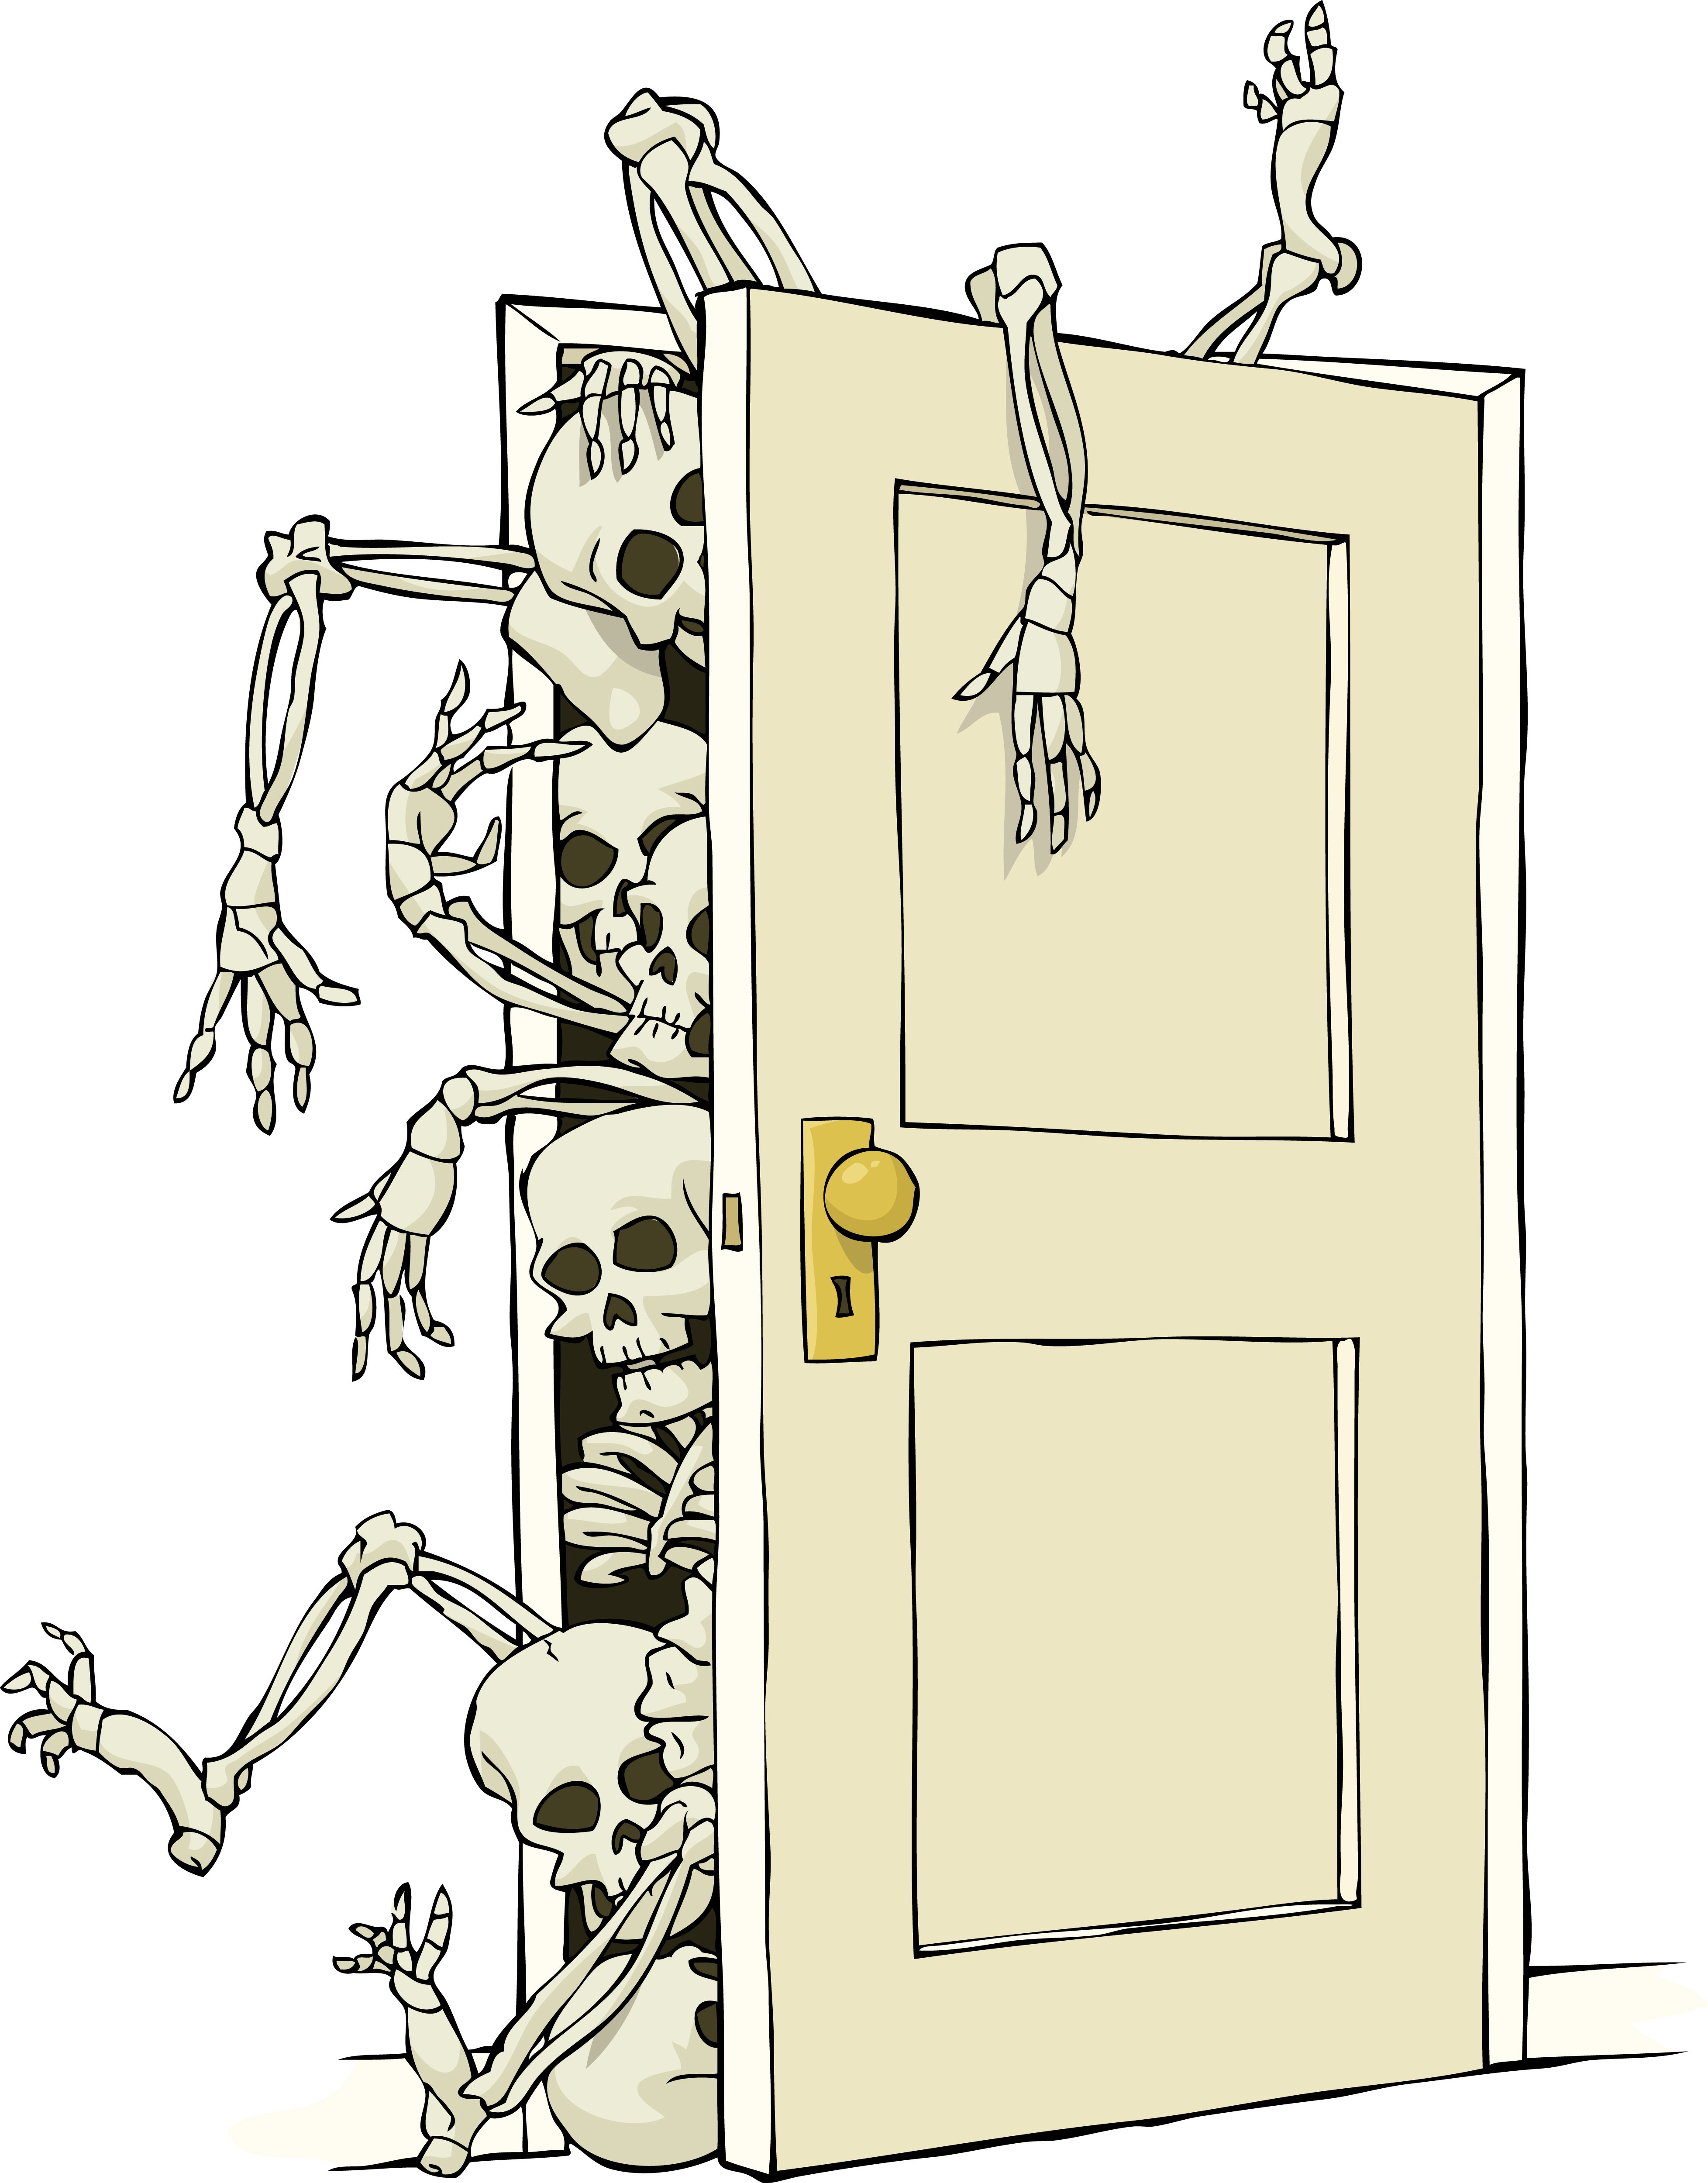 Skeletons in The Closet 